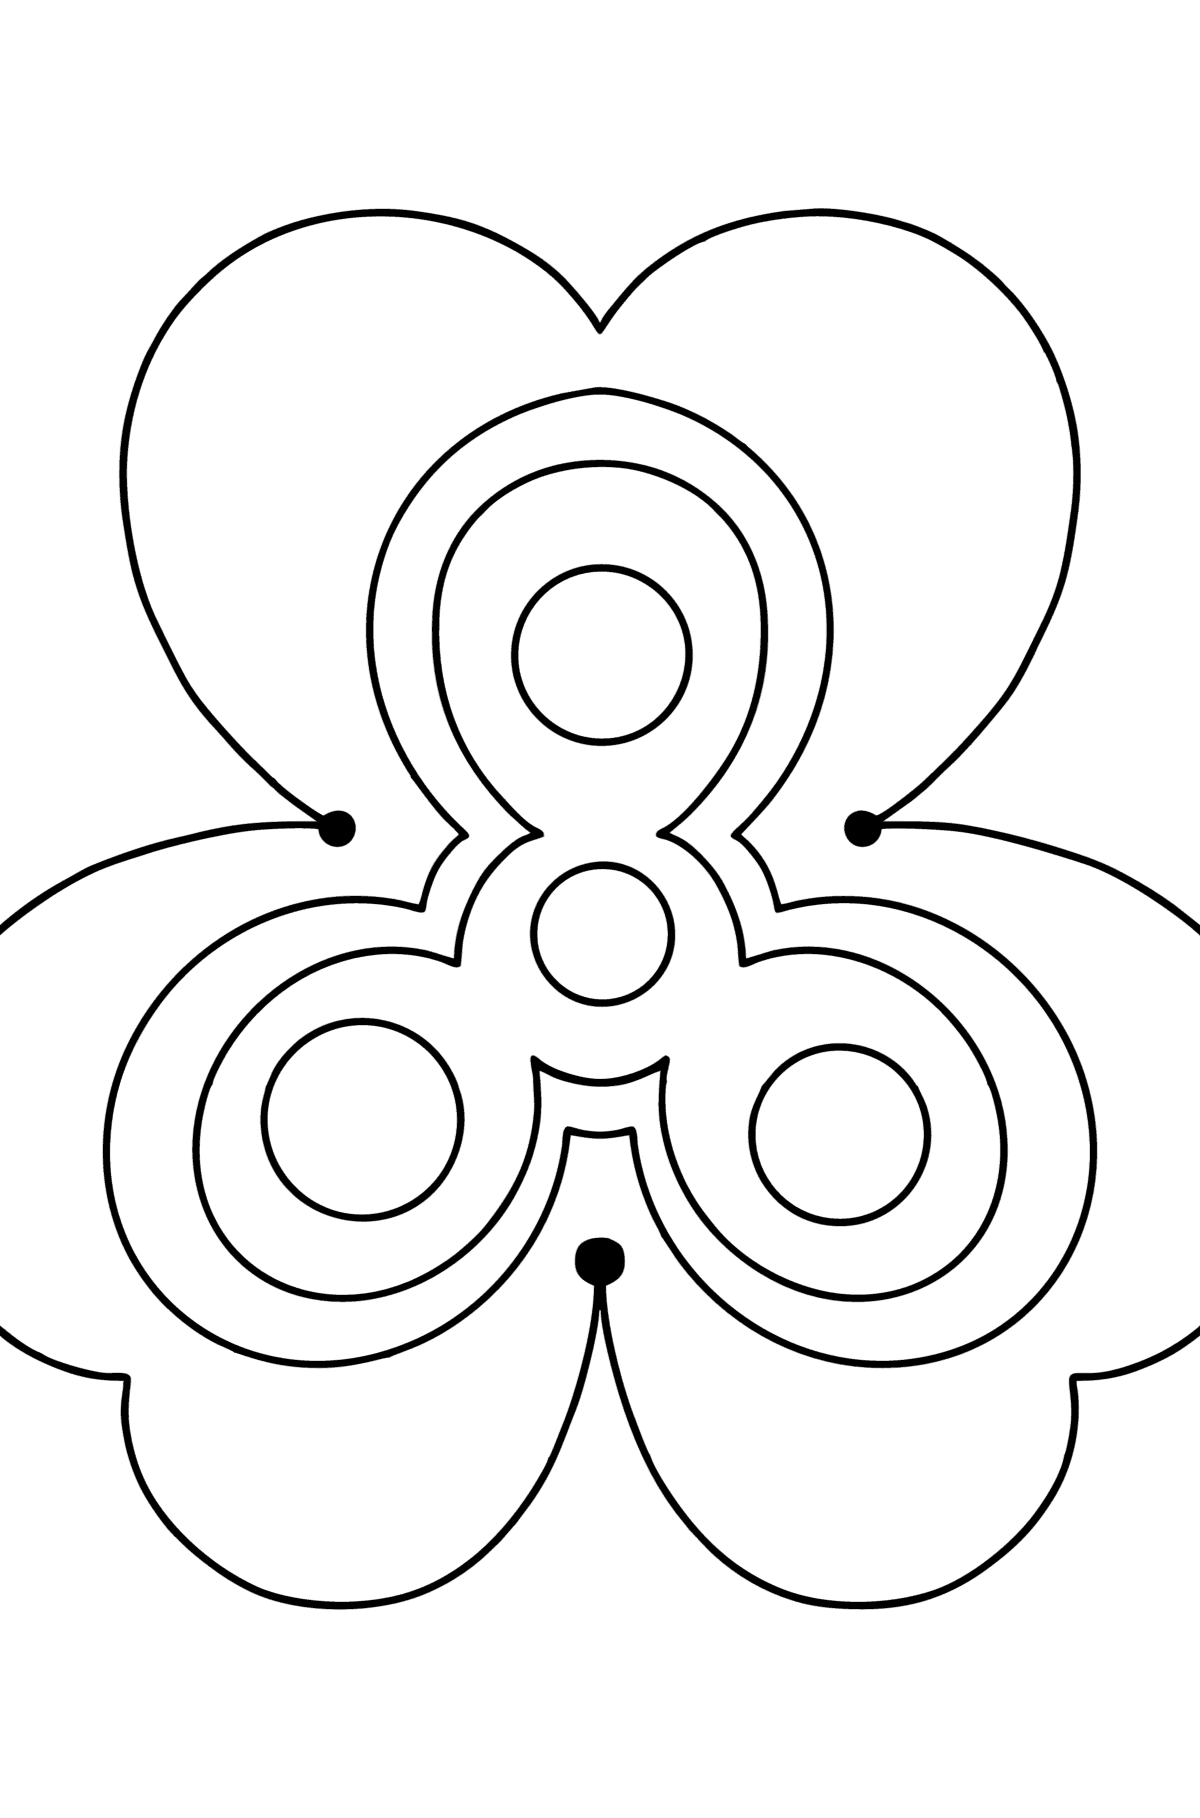 Simple Anti stress Flower coloring page - Coloring Pages for Kids